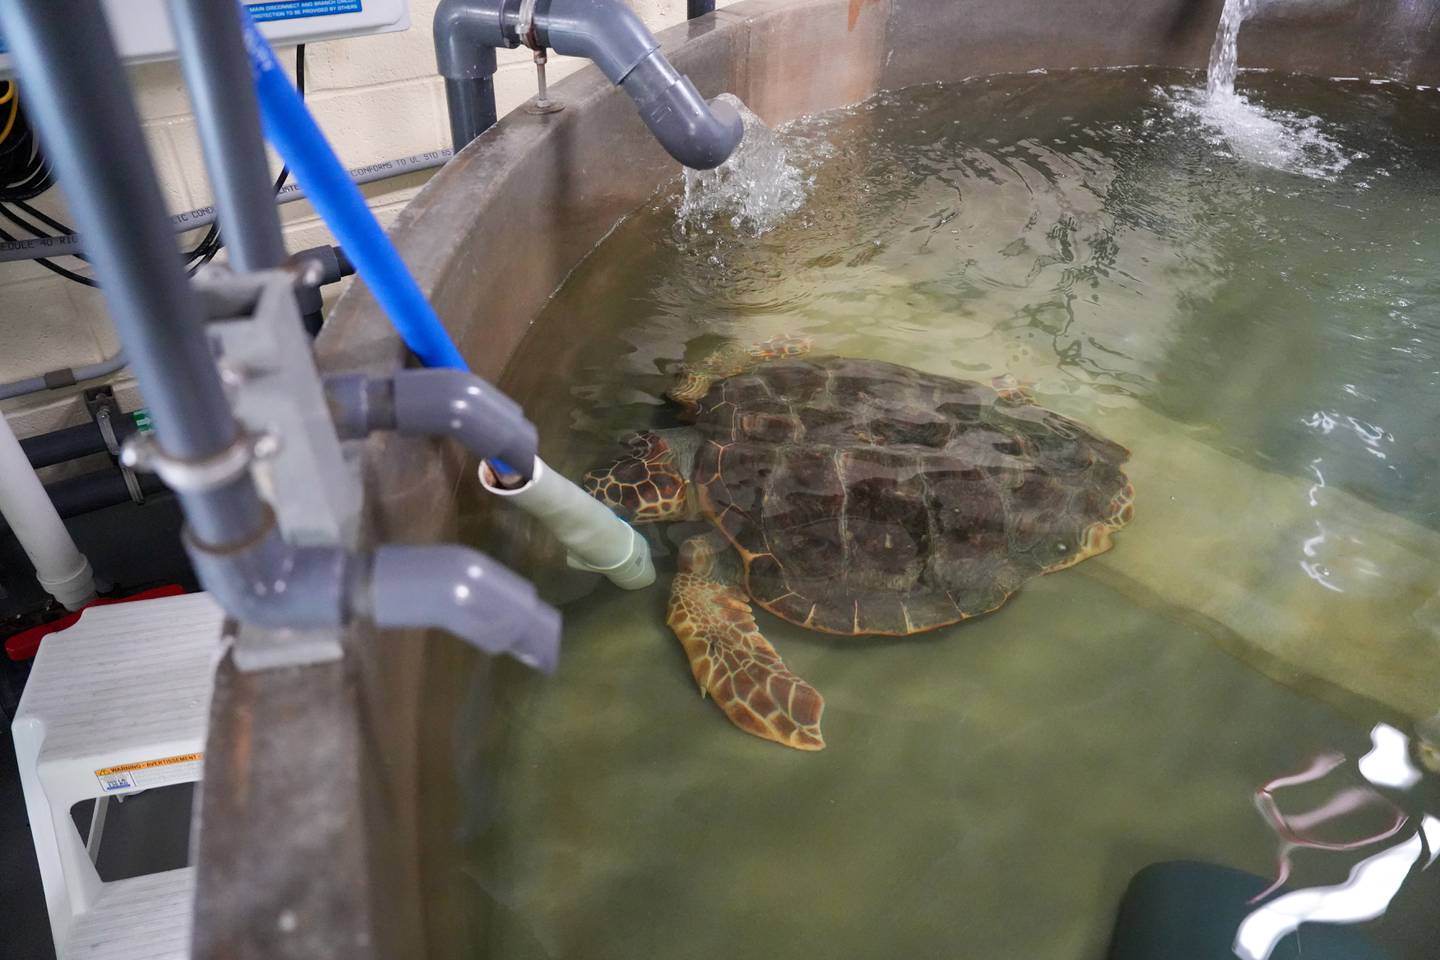 Glockenspiel loves to eat crabs and can digest the shells so they pass out completely soft, said Jenn Ditmar, director of the National Aquariums animal rescue team.